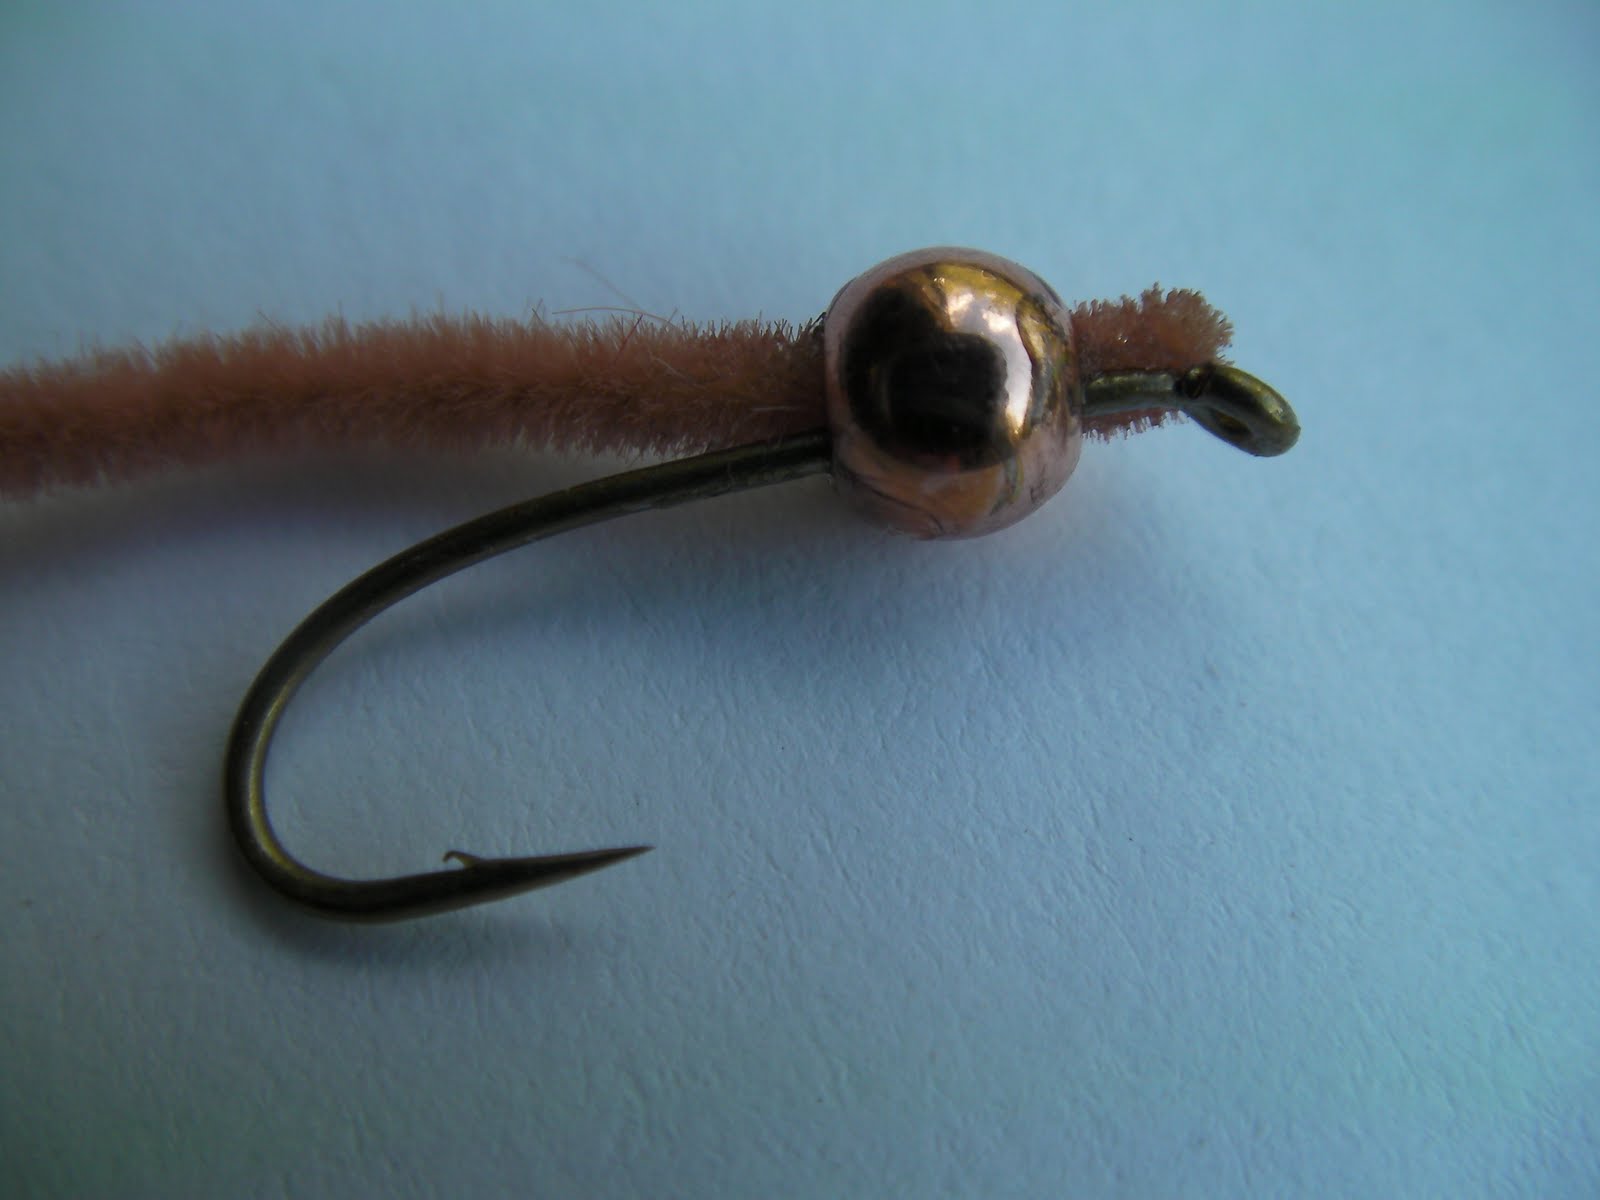 Fly Tying Videos: How to Tie Flies for Freshwater and Saltwater: How to tie  a San Juan Worm - With a Bead